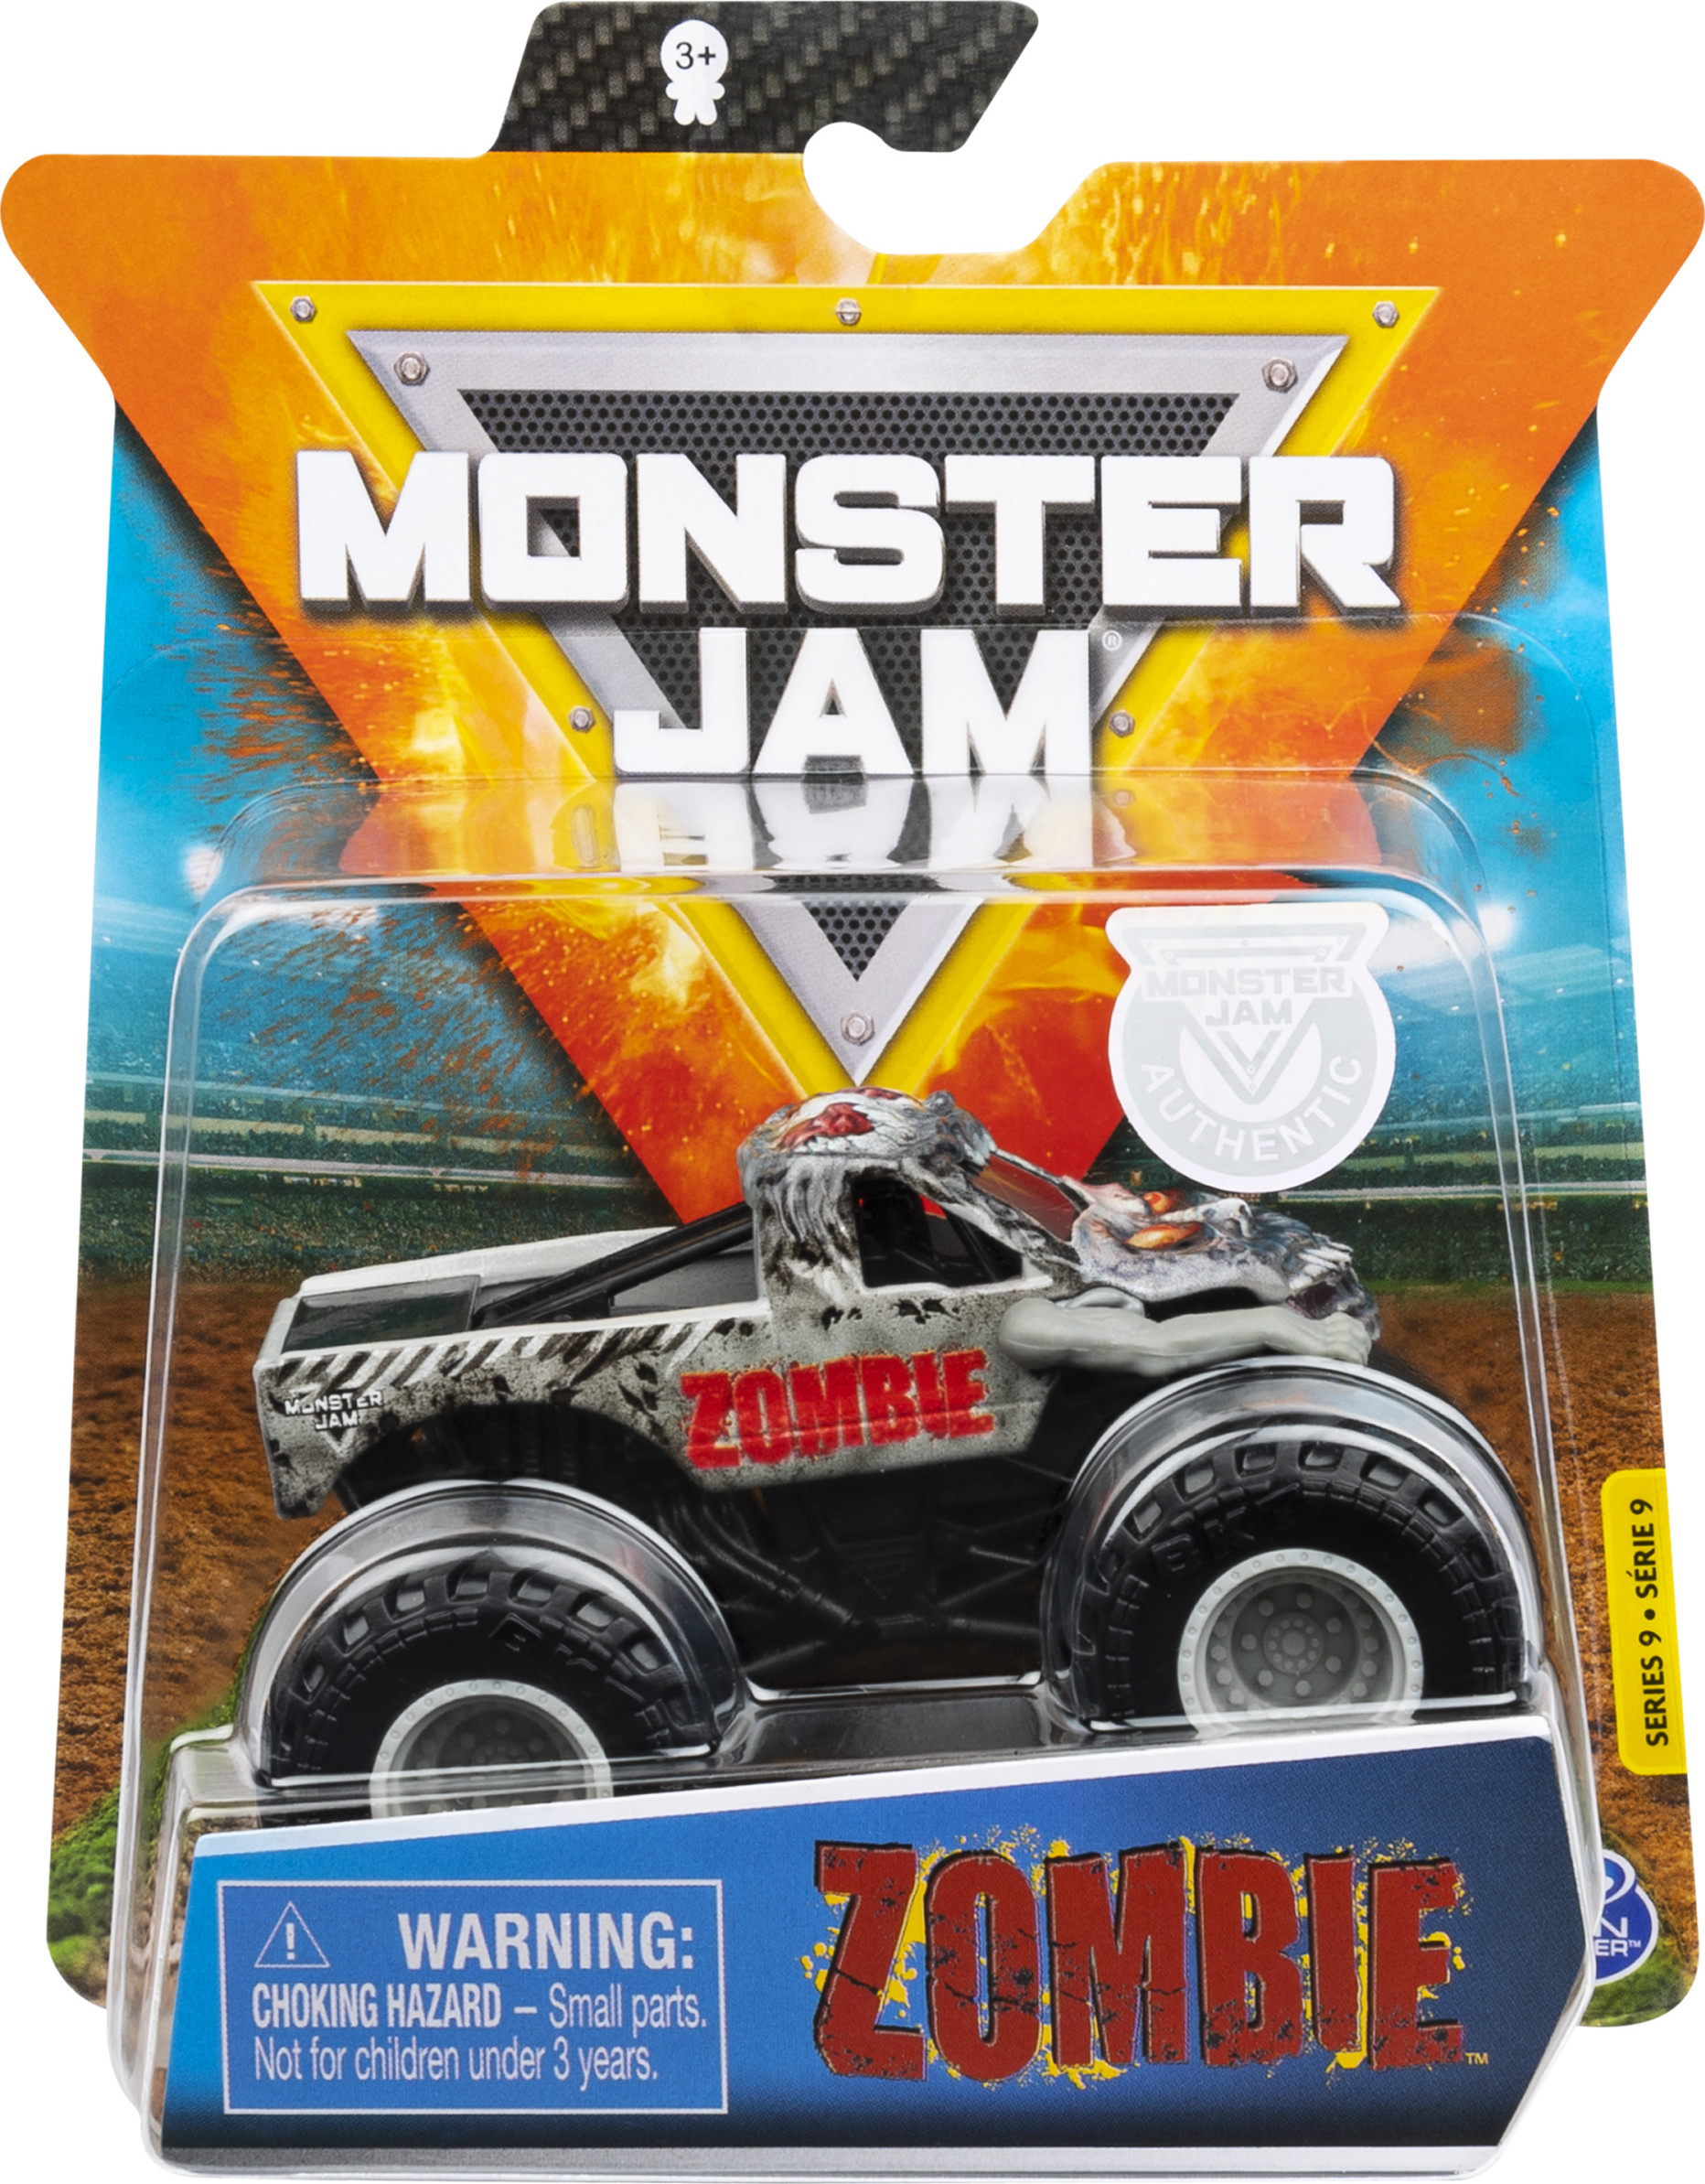 Monster Jam, Official 1:64 Scale Die-Cast Monster Truck (Styles May Vary) - image 2 of 7